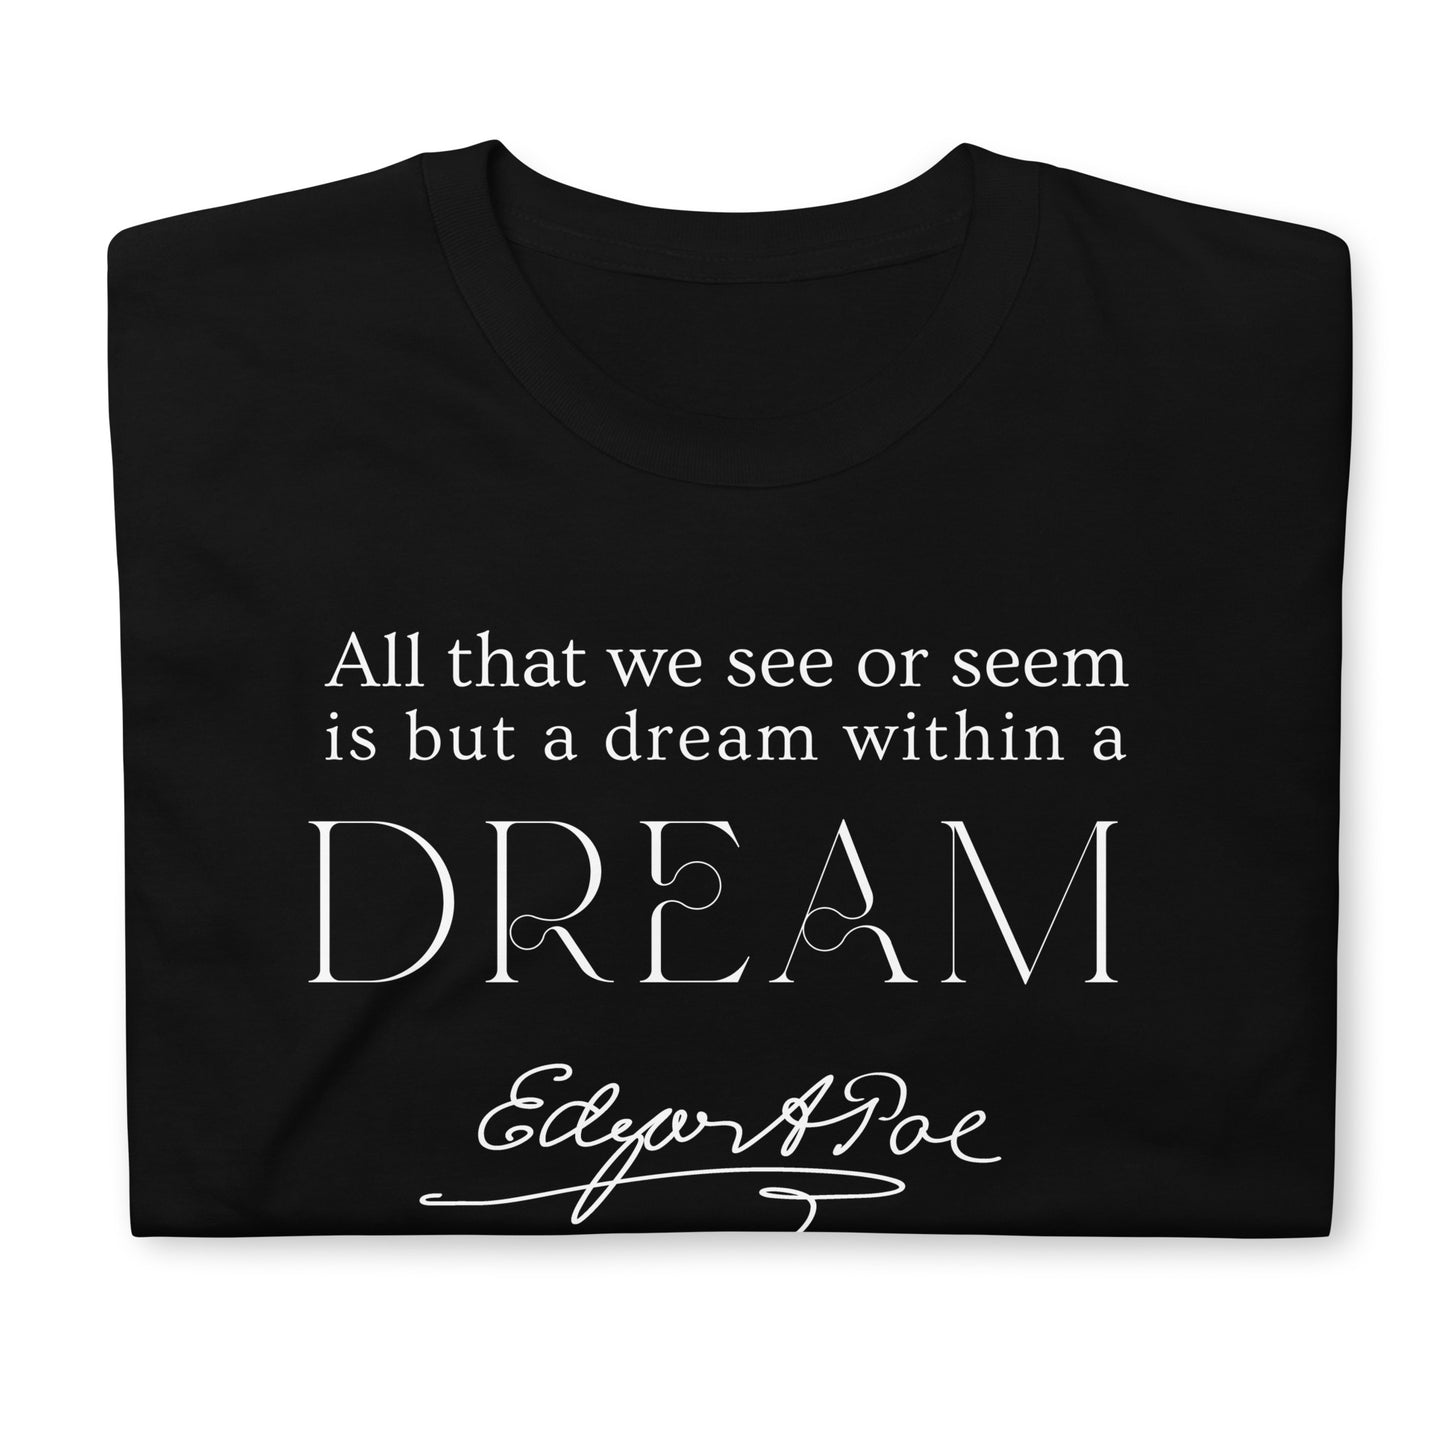 All that we see or seem is but a dream within a DREAM Short-Sleeve Unisex T-Shirt, Edgar Allan Poe Poem, Fantasy